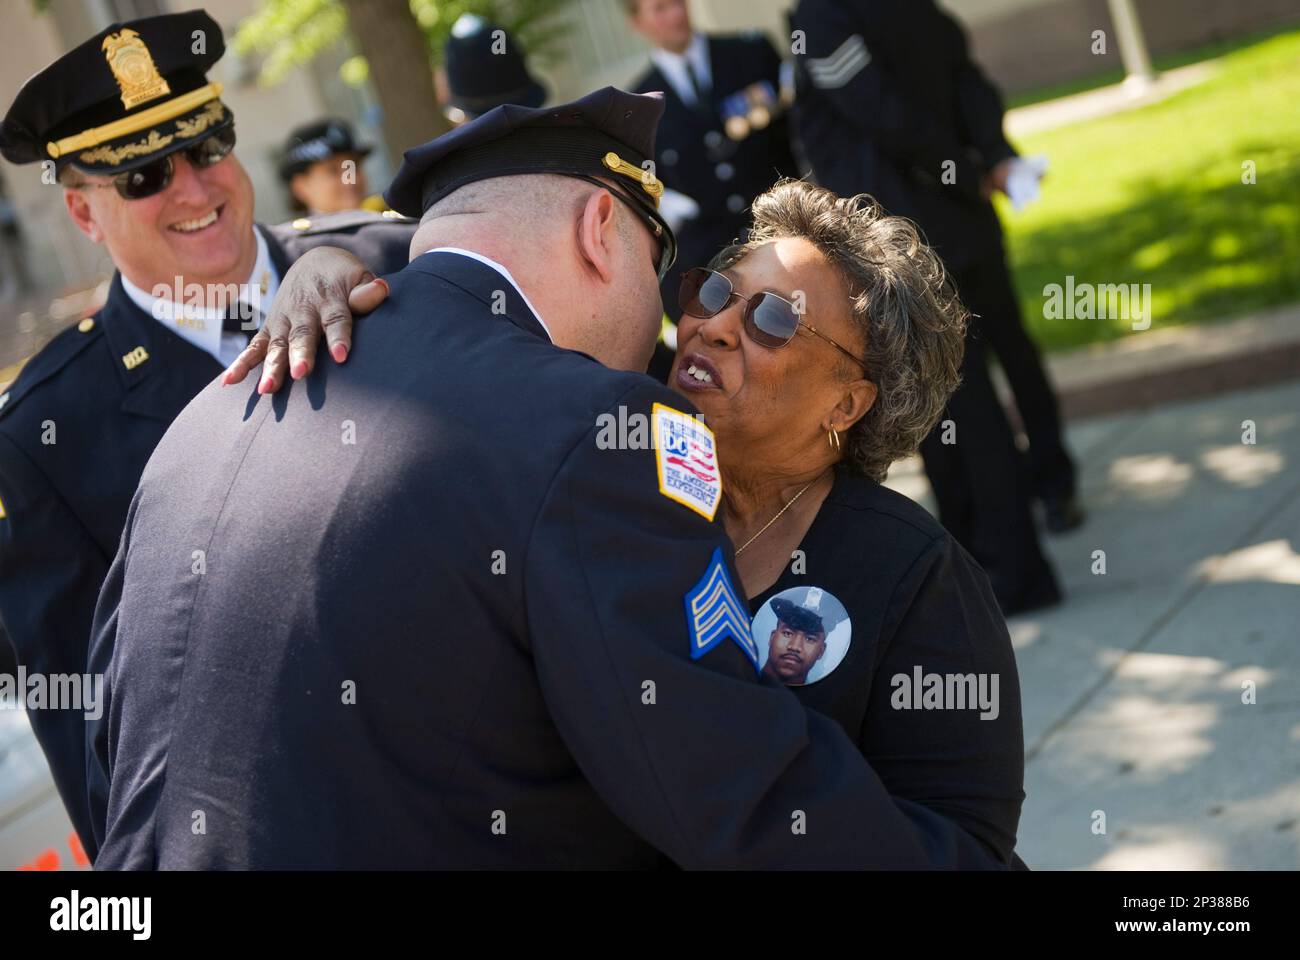 UNITED STATES - MAY 9: Shirley Gibson, whose son Master Patrol Officer ...